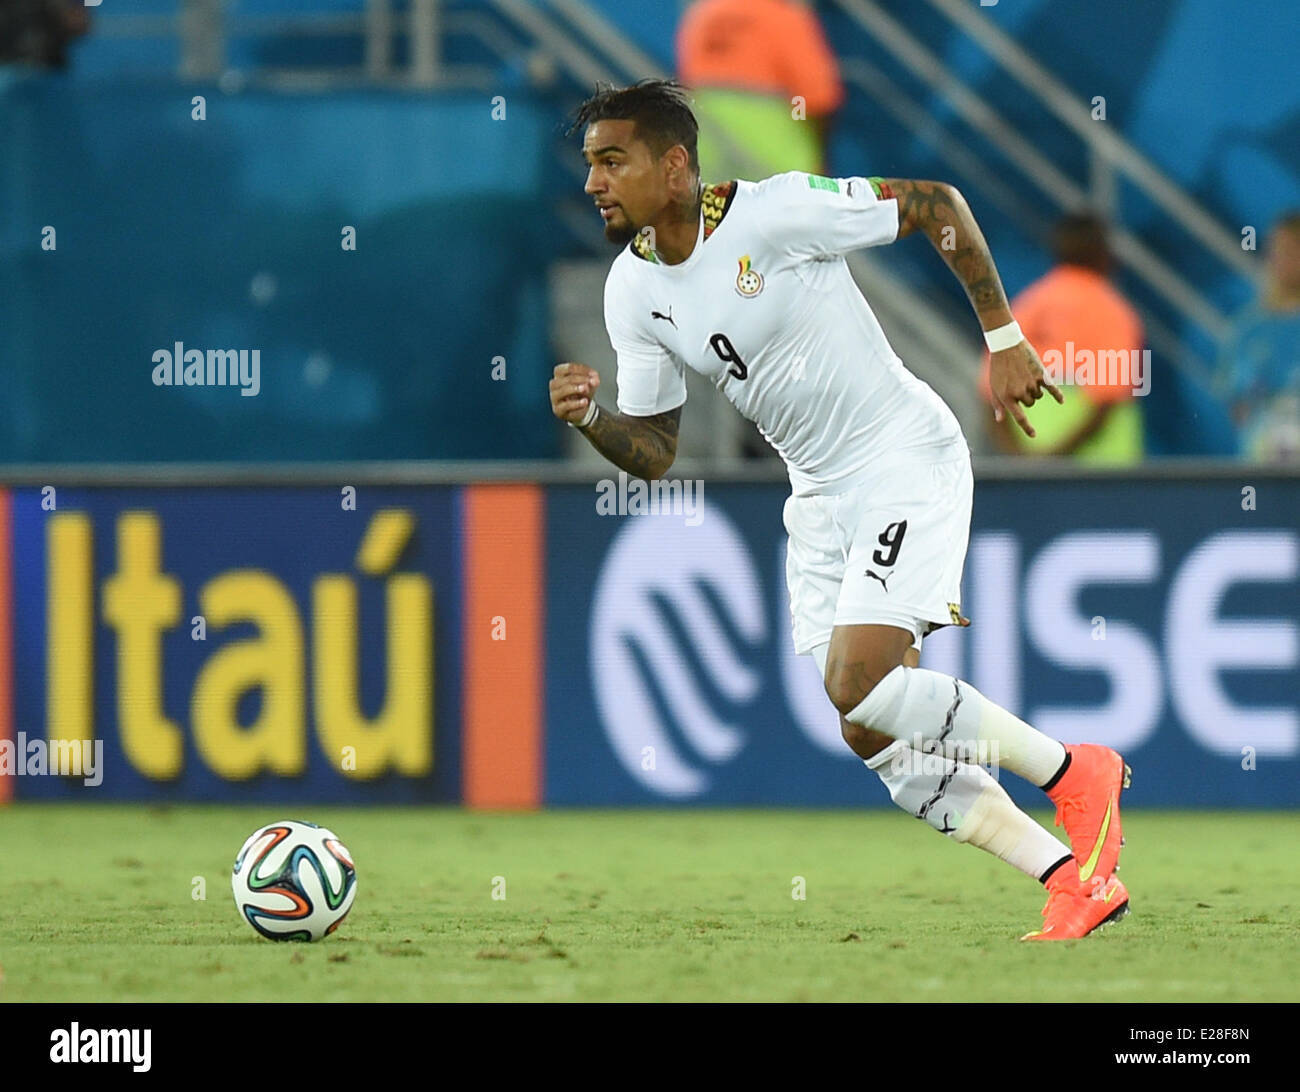 Natal, Brazil. 16th June, 2014. Kevin Prince Boateng of Ghana in action during the FIFA World Cup 2014 group G preliminary round match between Ghana and the USA at the Estadio Arena das Dunas Stadium in Natal, Brazil, 16 June 2014. Credit:  dpa picture alliance/Alamy Live News Stock Photo